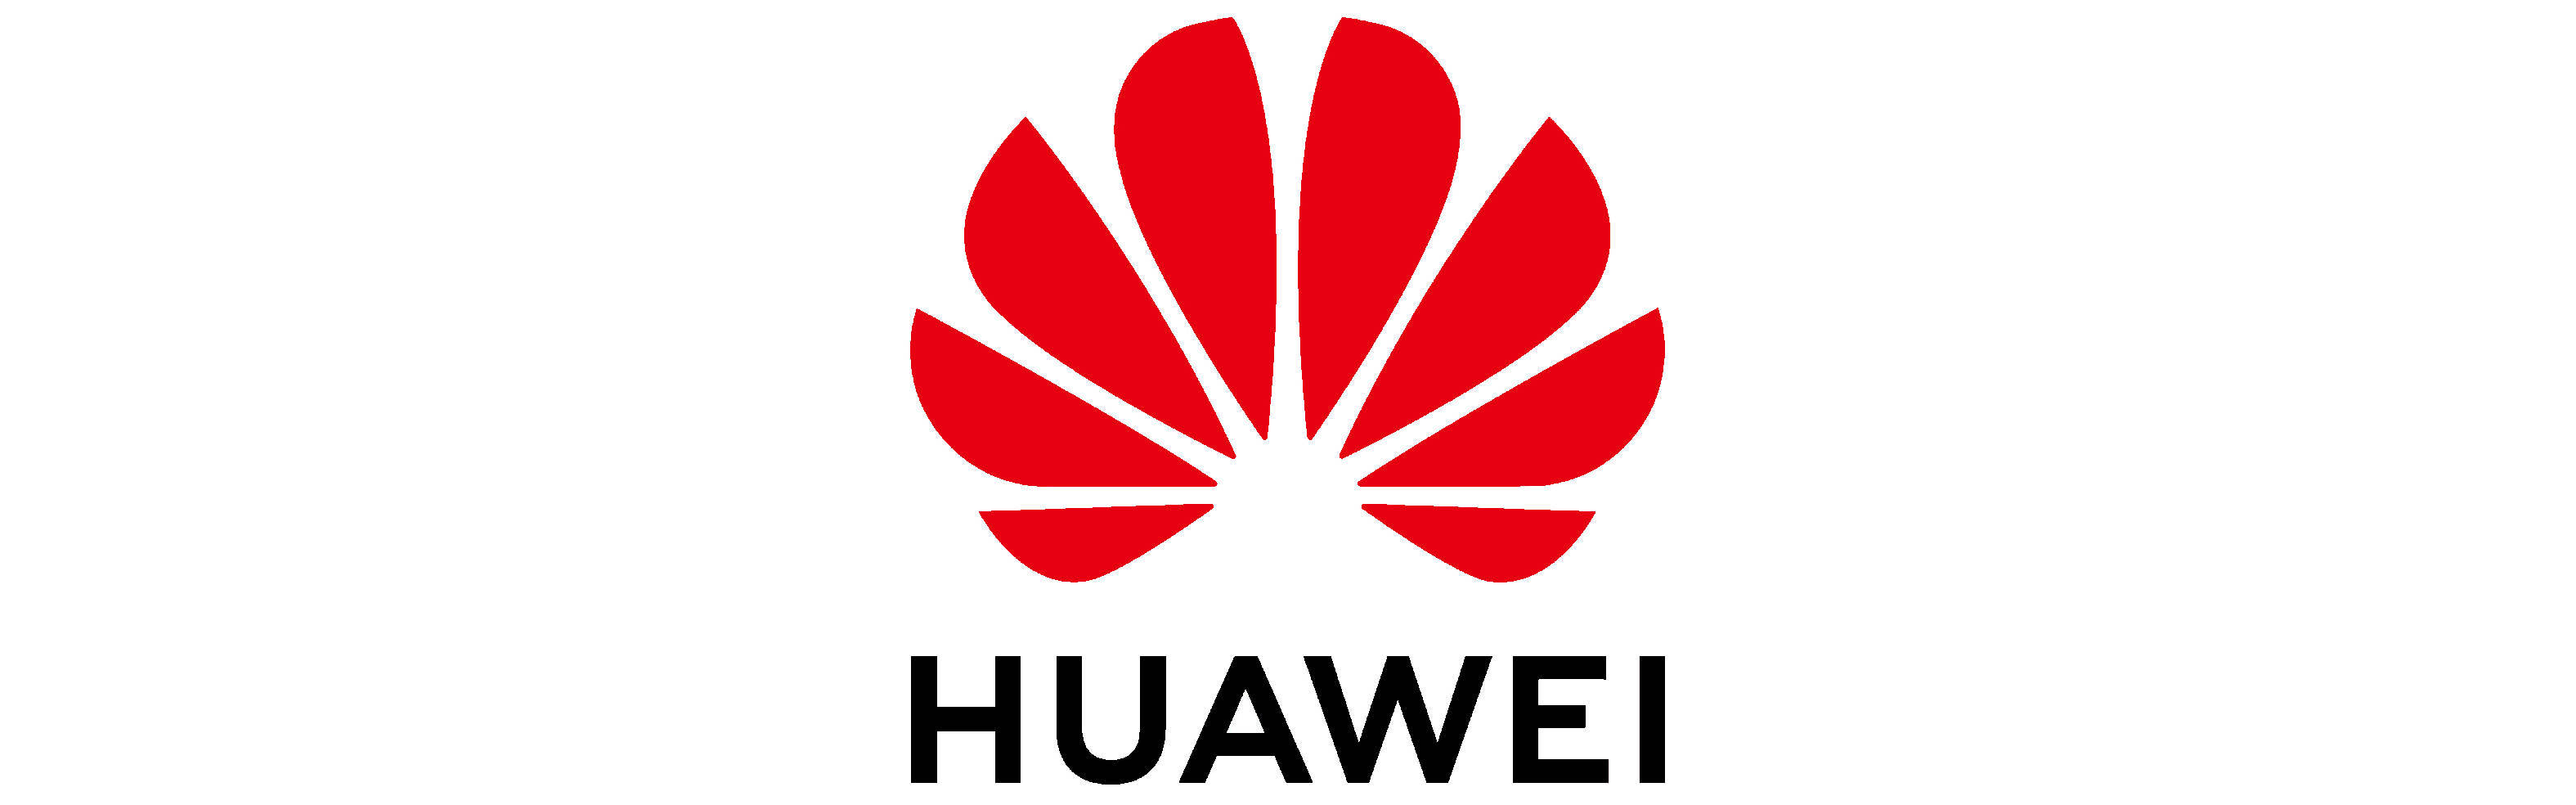 <span style='color:red;'>AI</span>面板识别 - <span style='color:red;'>华为</span><span style='color:red;'>OD</span><span style='color:red;'>统一</span>考试